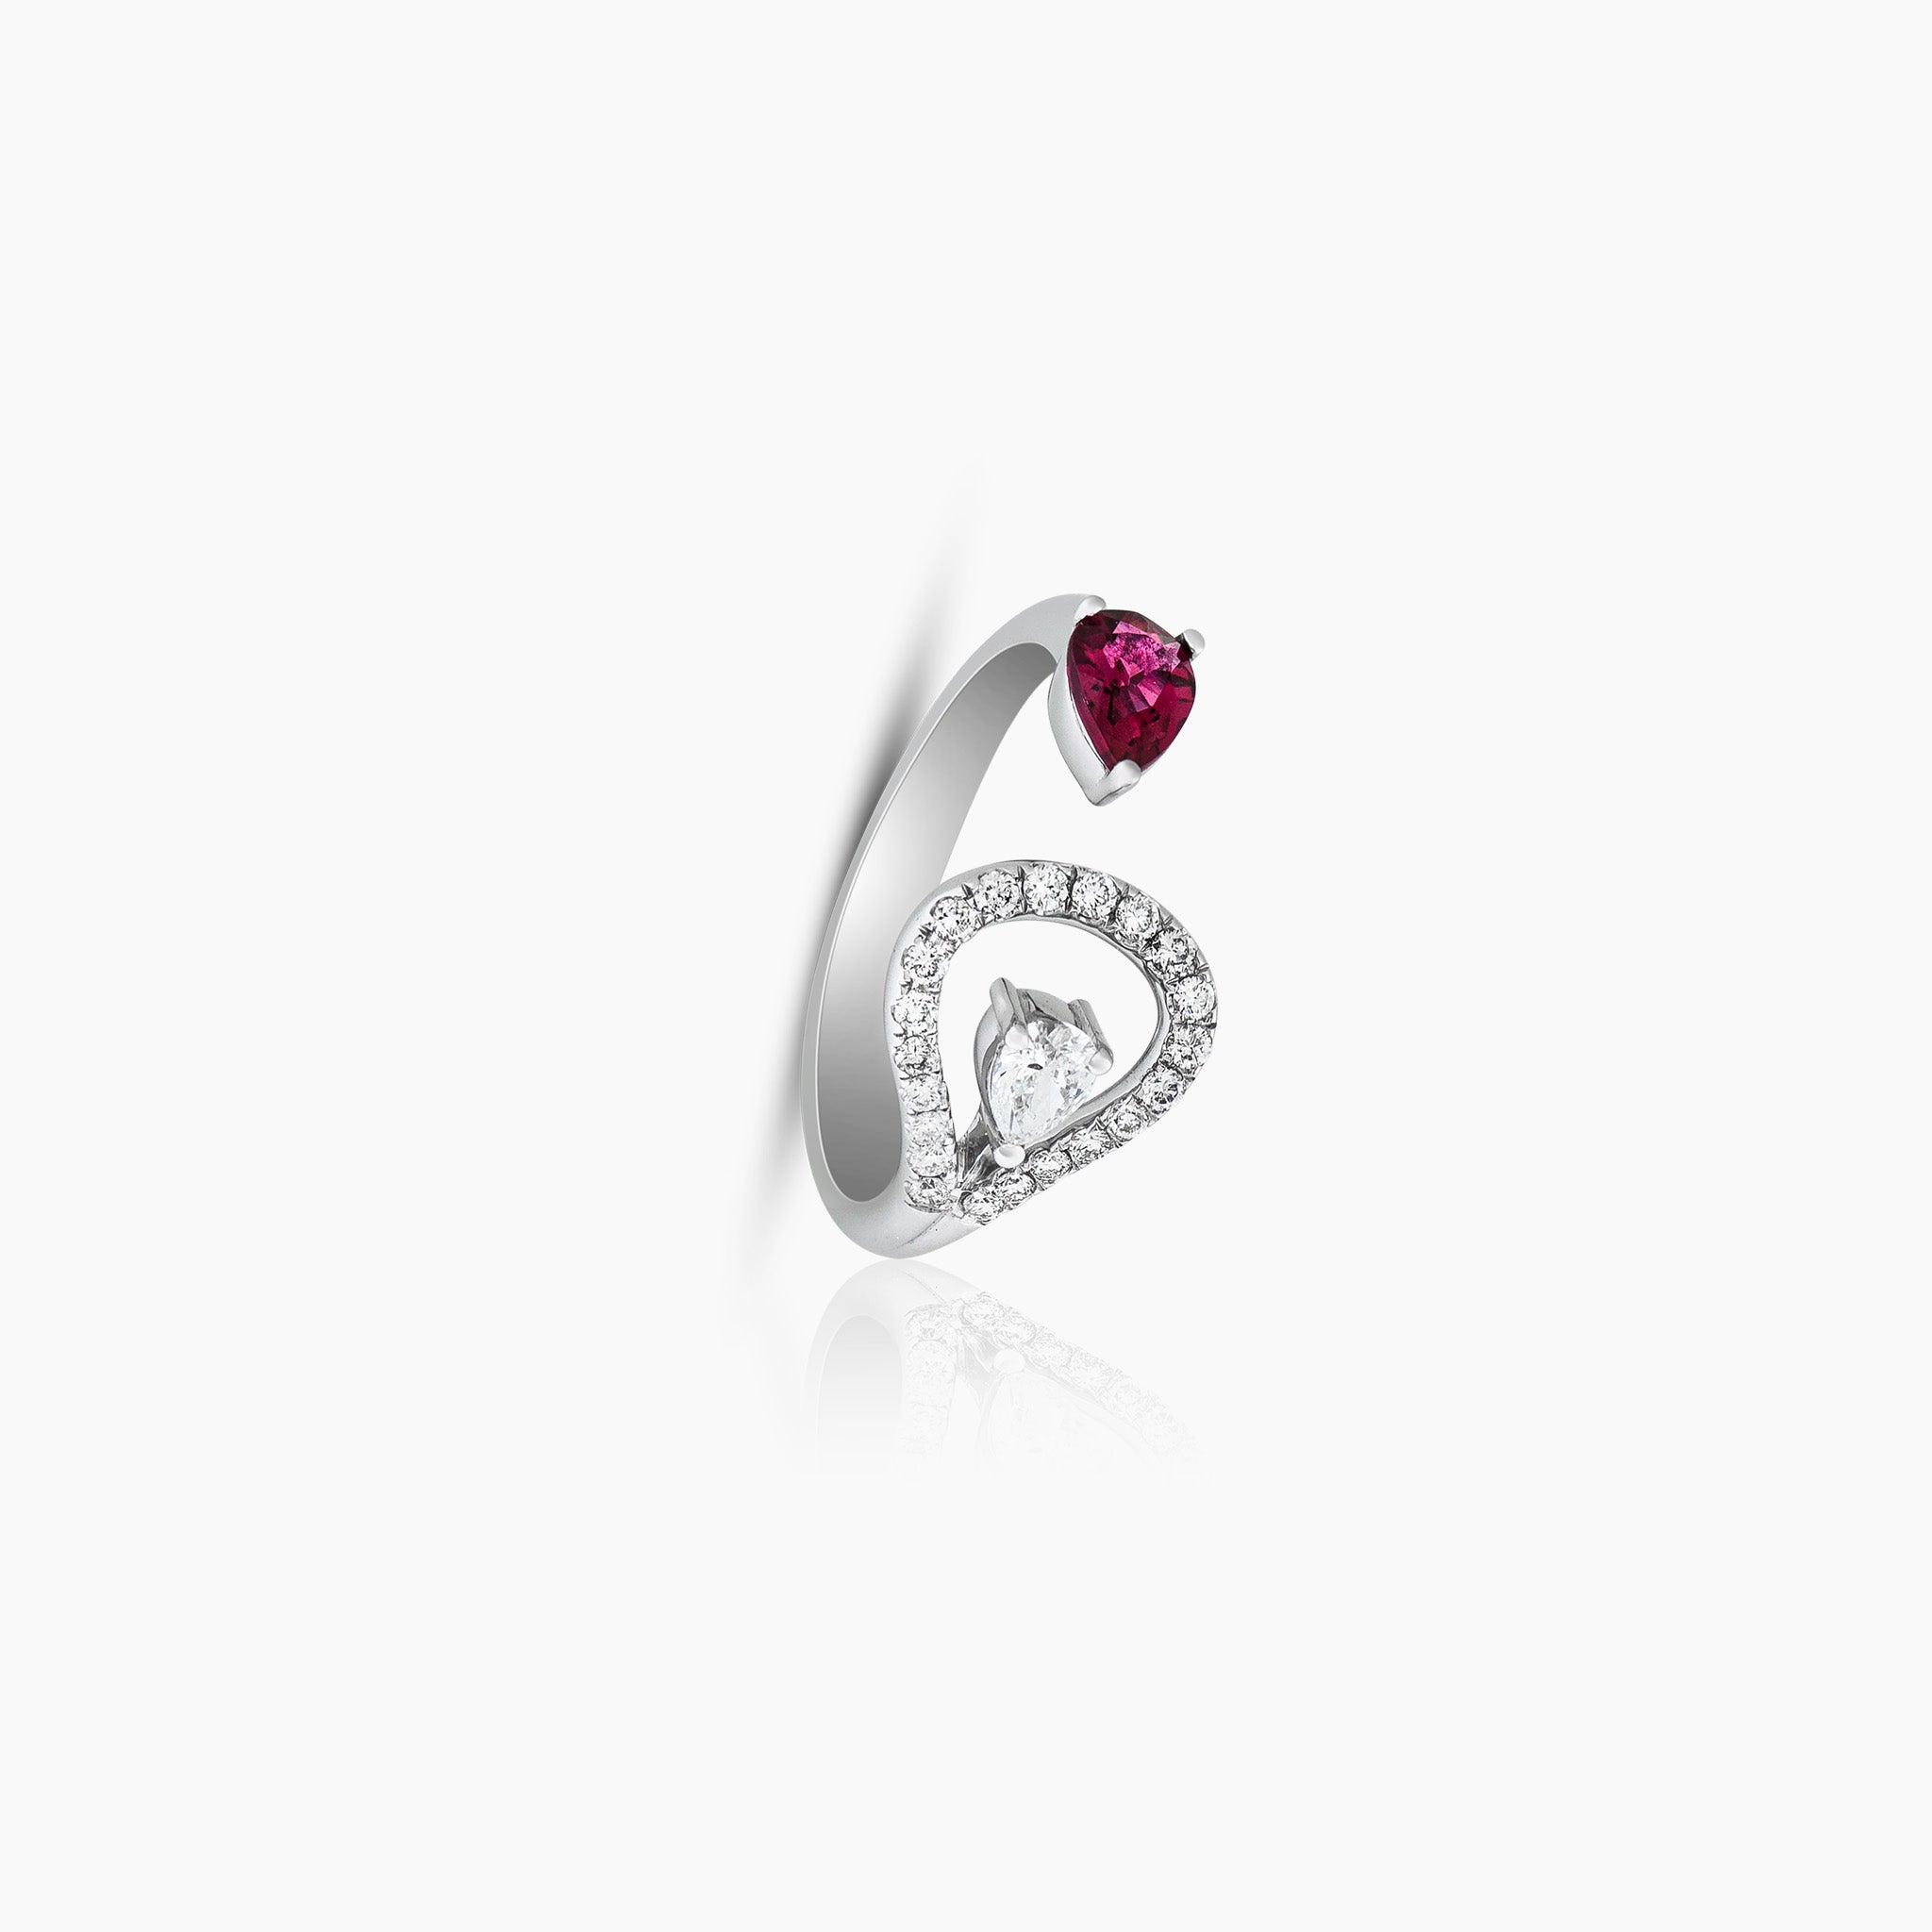 A stunning ring adorned with a pear rubellite and dazzling diamonds, set against an off-white background.